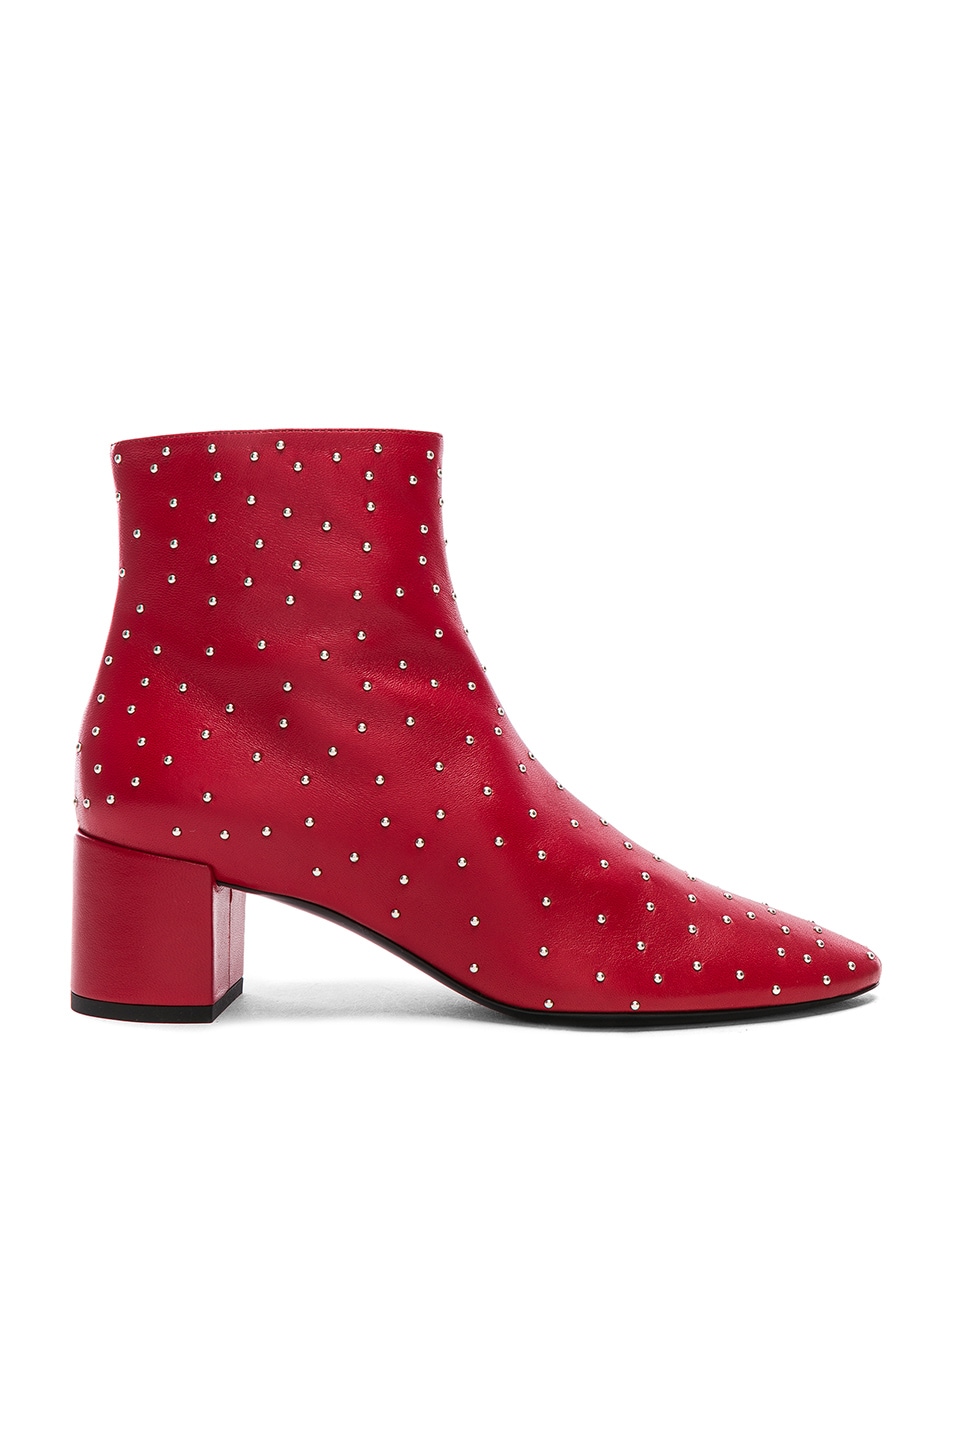 Image 1 of Saint Laurent Loulou Studded Leather Ankle Boots in Eros Red